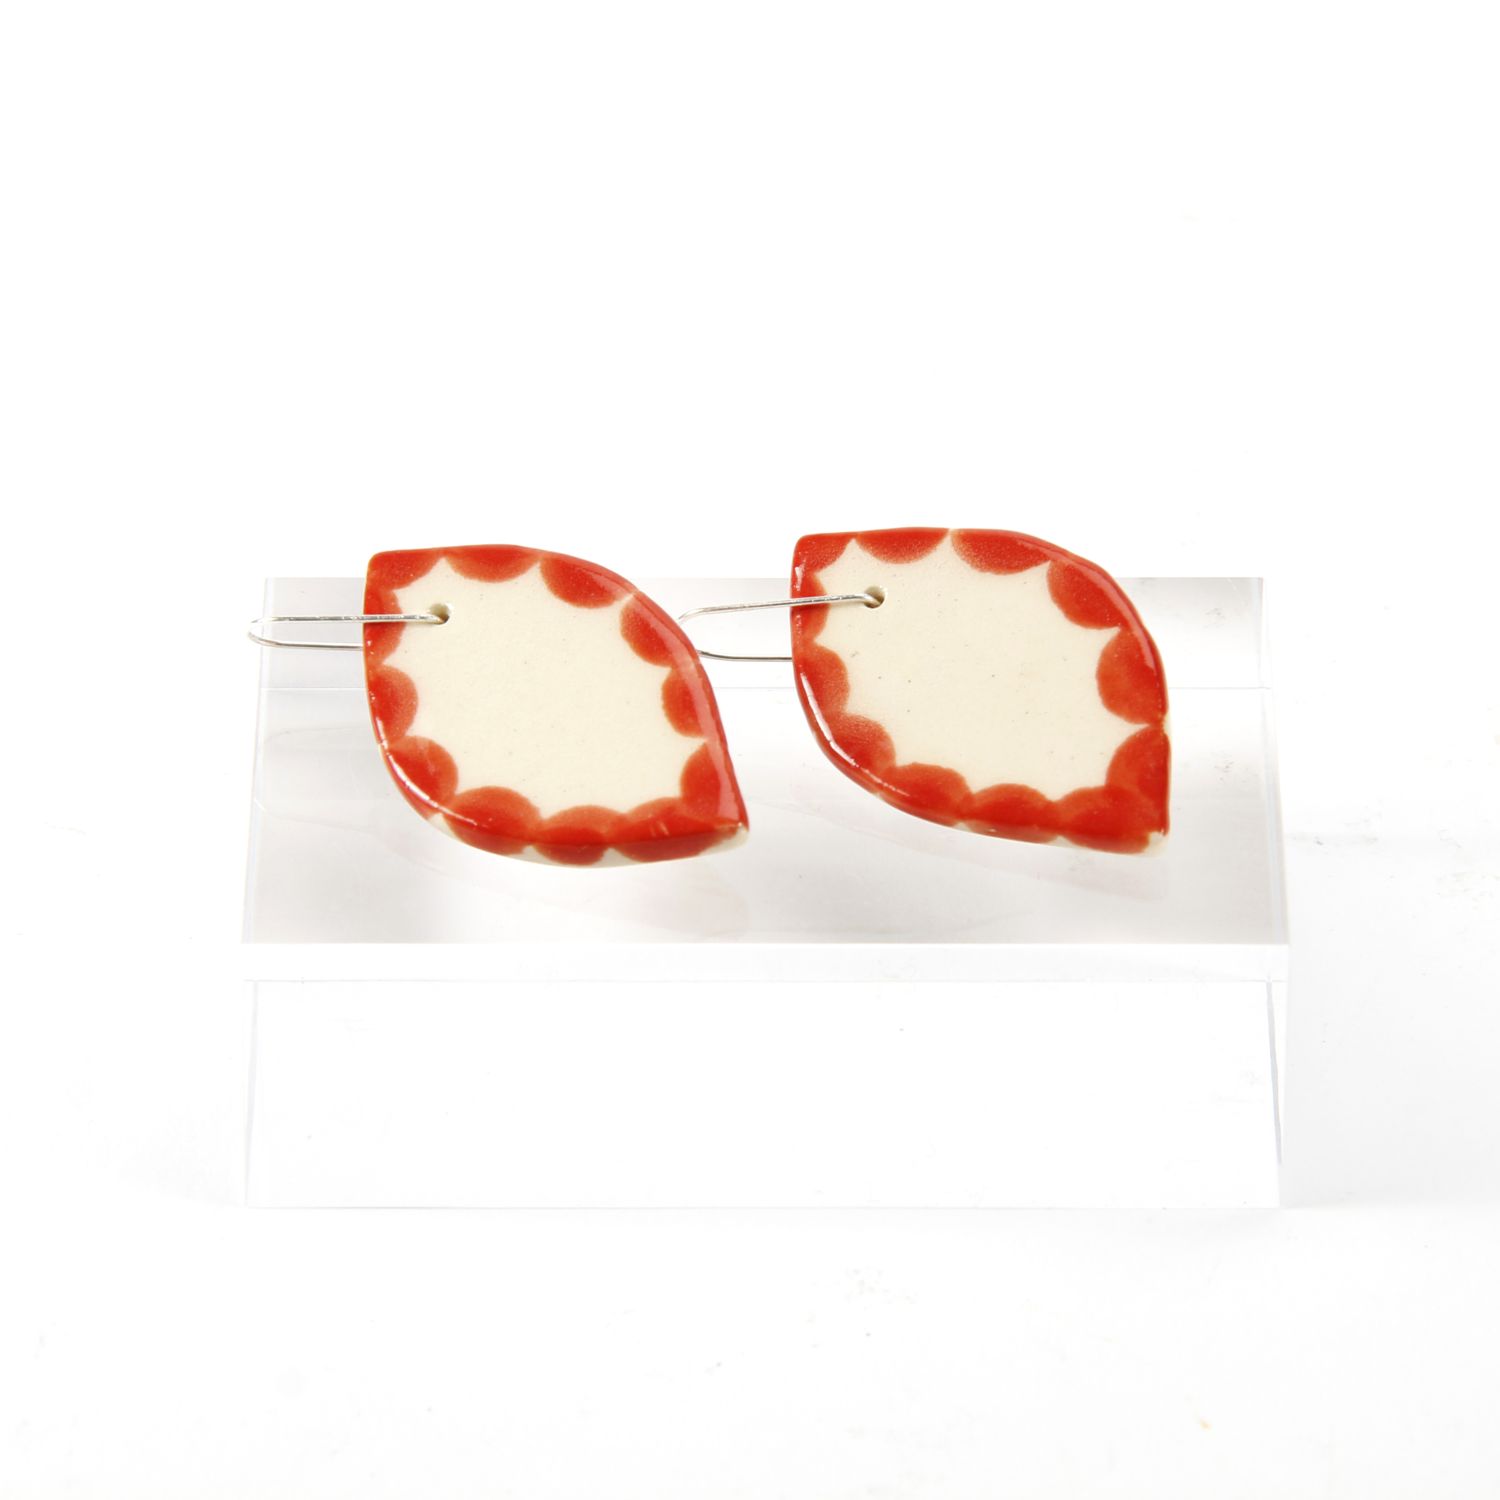 Here and Here: Almond Shaped Earrings with Dots Product Image 2 of 2